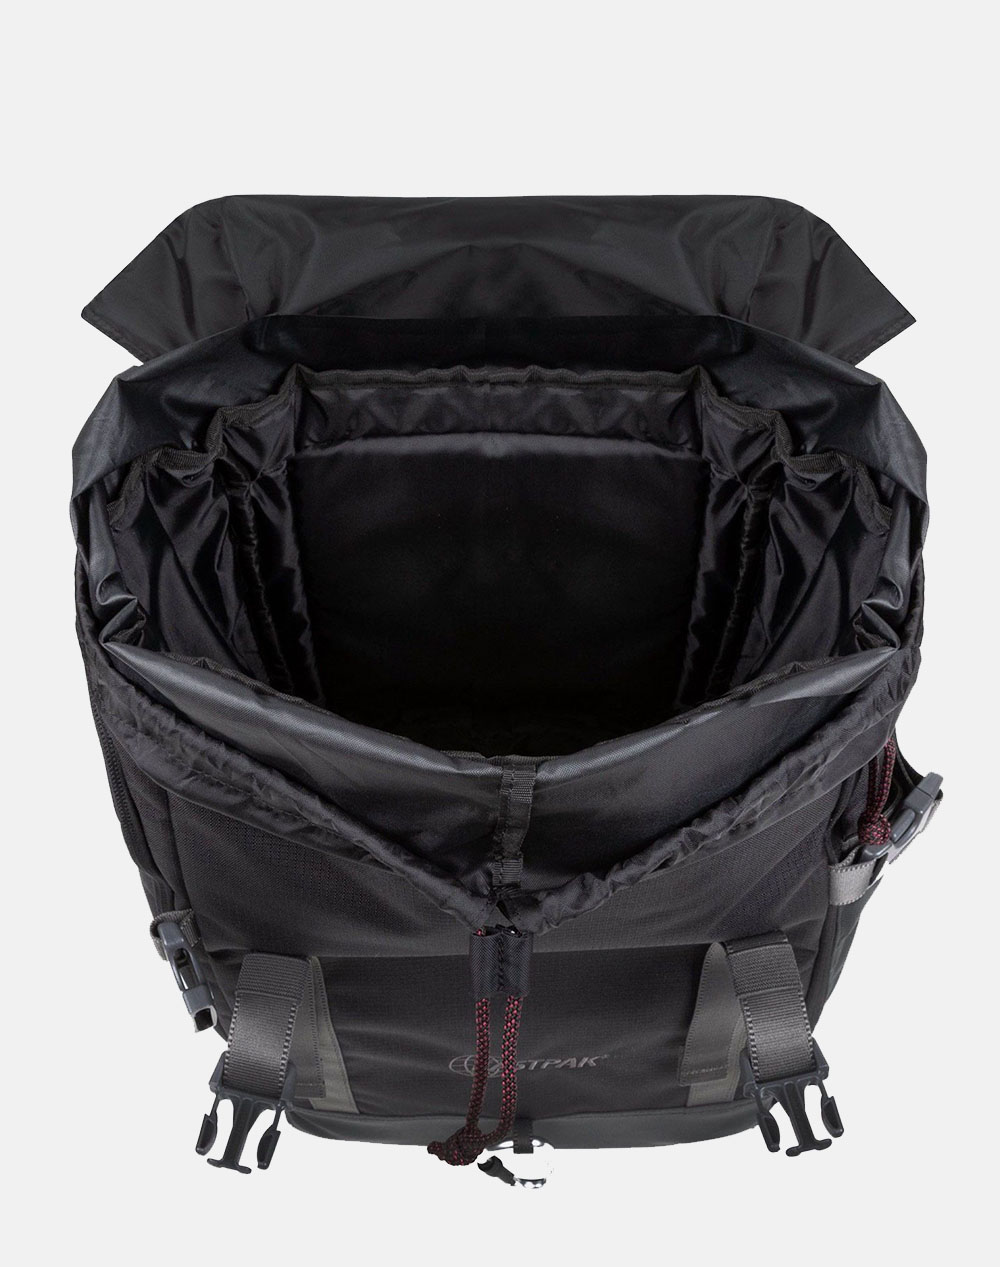 EASTPAK OUT CAMERA PACK (Dimensions: 44 x 29 x 19 cm)